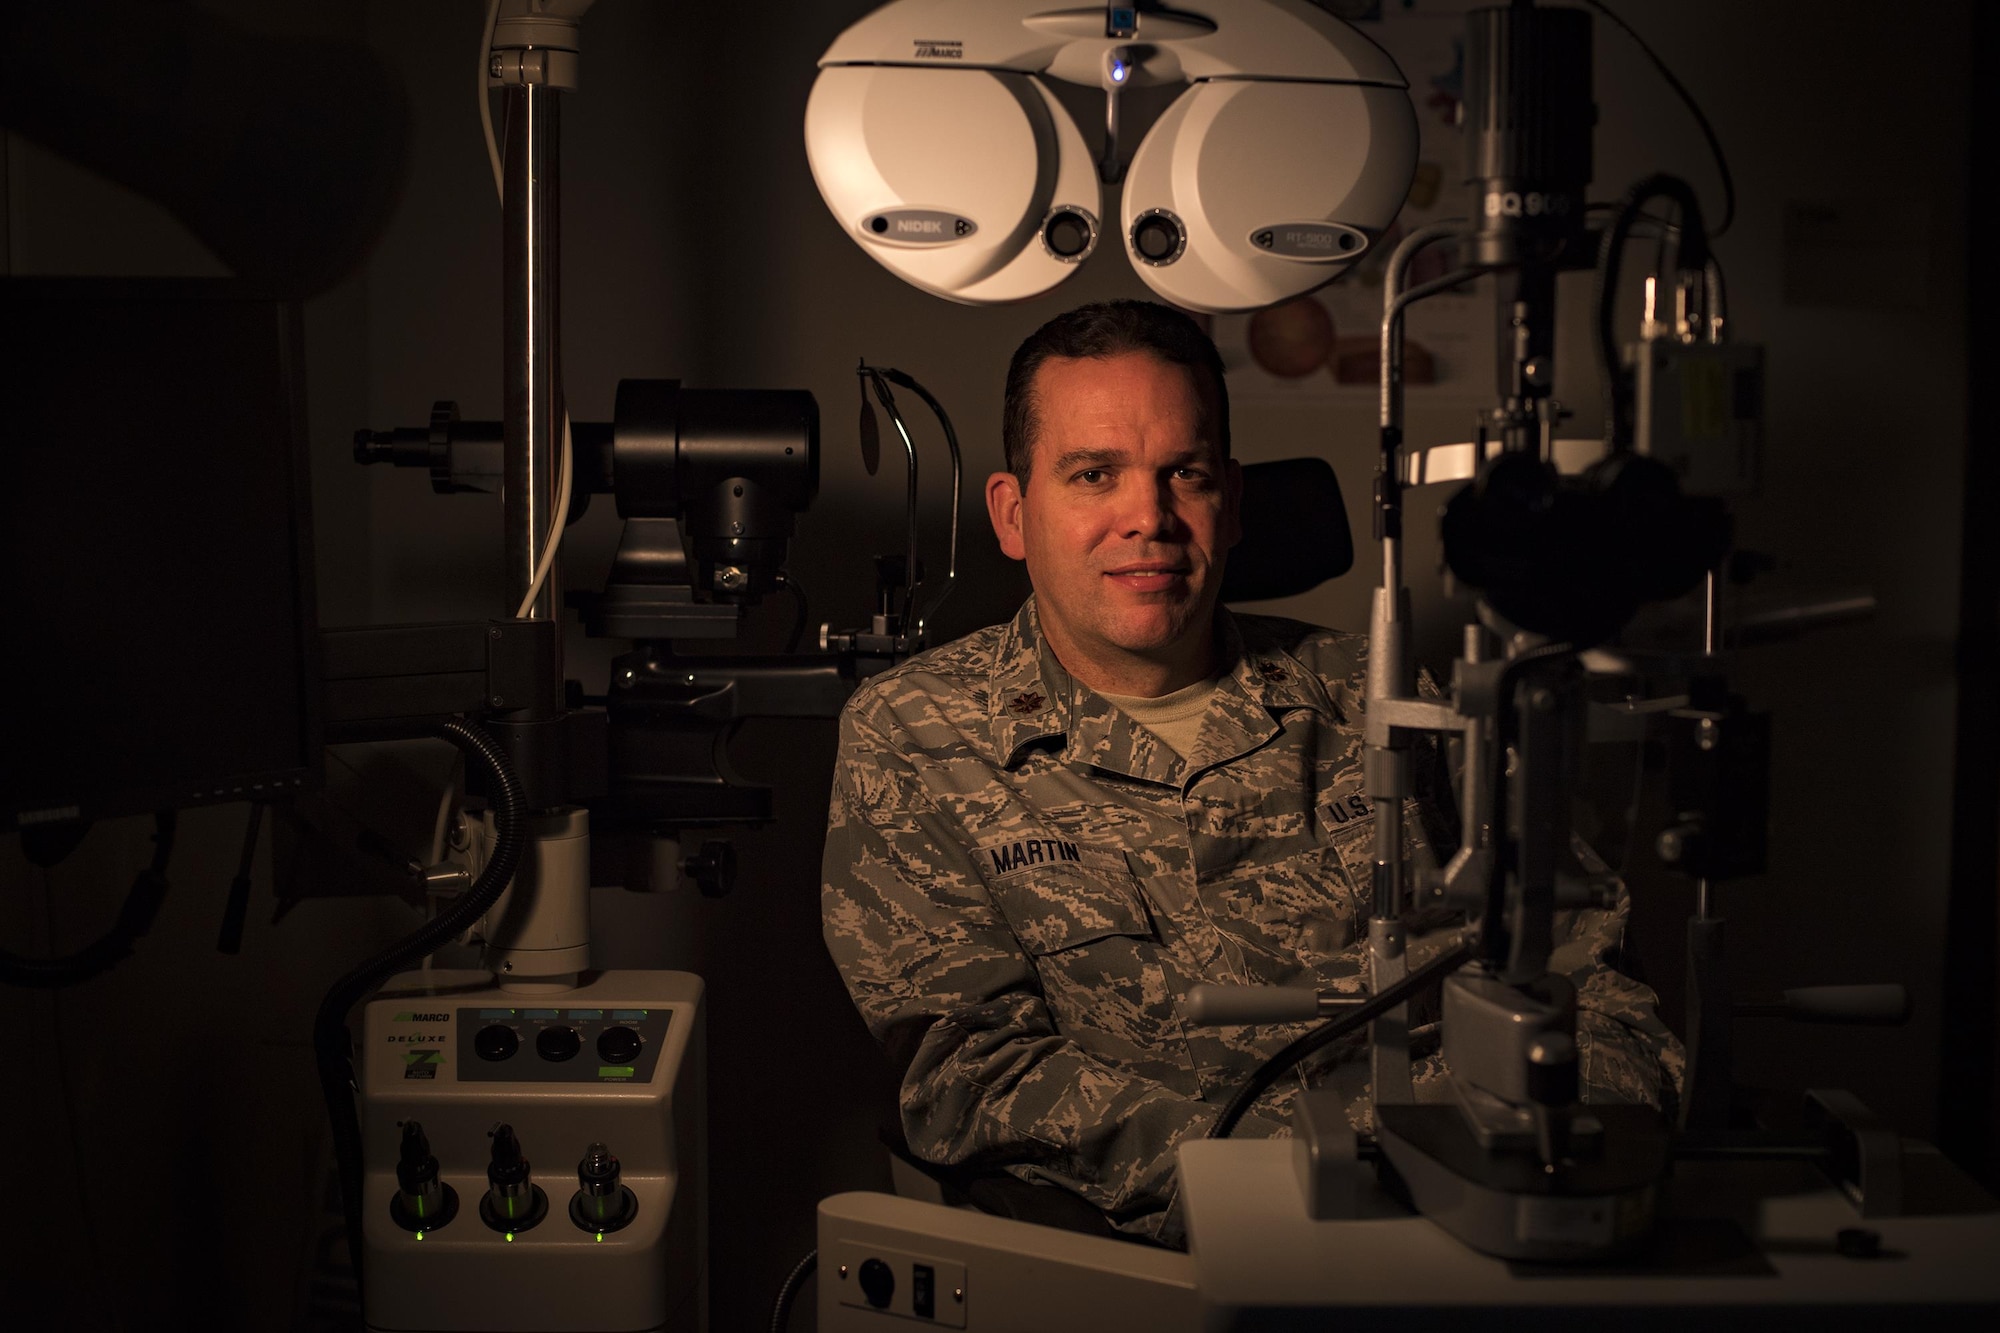 Maj. Scott Martin, 23d Aerospace Medicine Squadron optometry flight commander, poses for a photo with various pieces of optometry equipment, Jan. 19, 2016, at Moody Air Force Base, Ga. Optometrists are responsible for examining, diagnosing, treating and managing diseases and disorders of the visual system. In the Air Force, there are currently 136 active duty, 74 Air Force reservist and 90 Air National Guard optometrists. (U.S. Air Force photo by Airman 1st Class Daniel Snider)